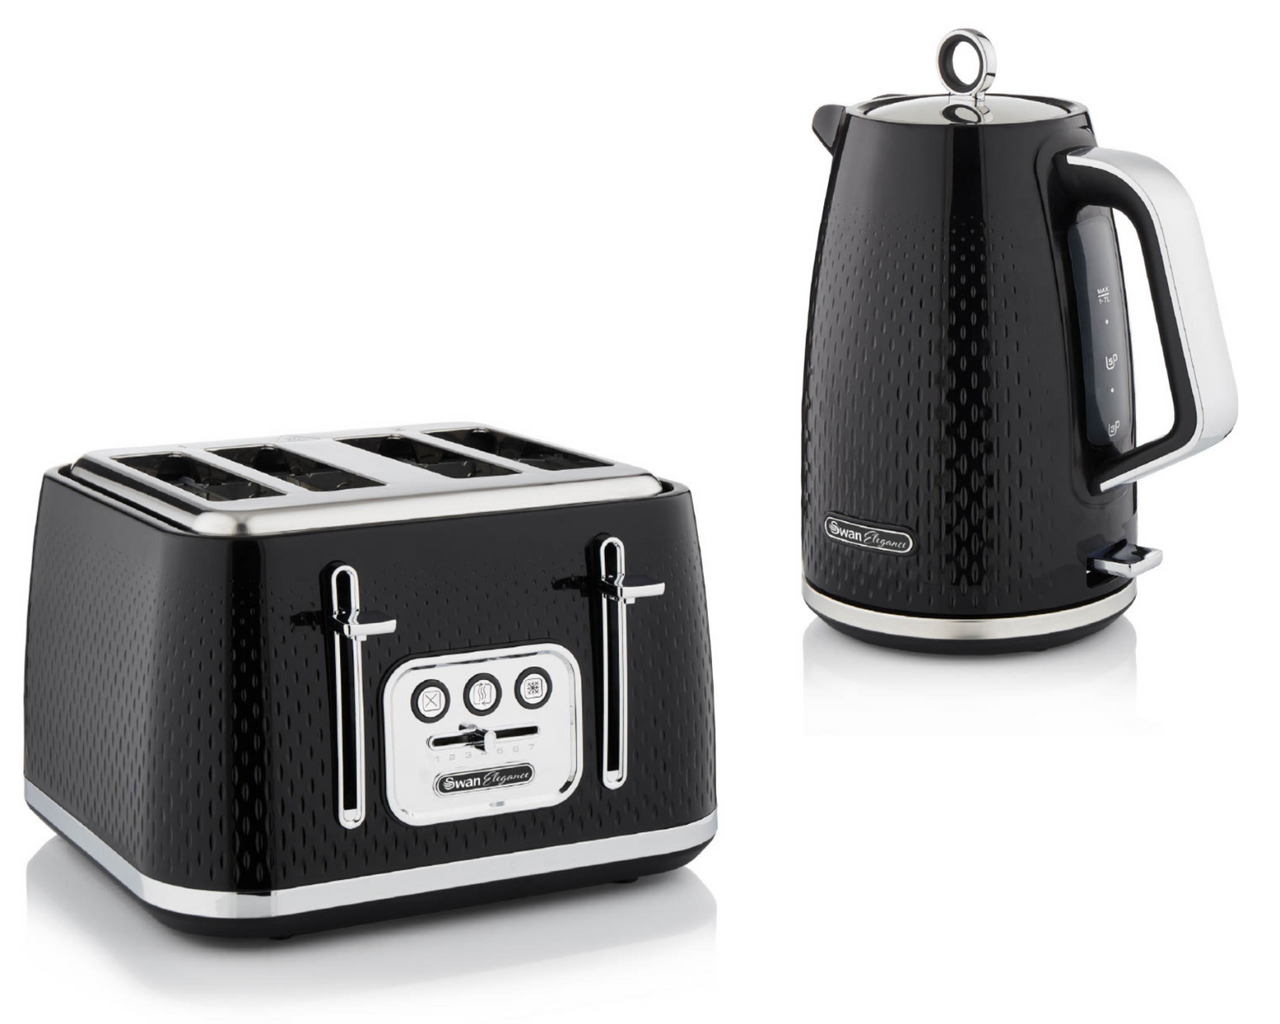 Swan Elegance 1.7L 3KW Kettle & 4 Slice Toaster with Textured Black Gloss Finish Chrome Trim